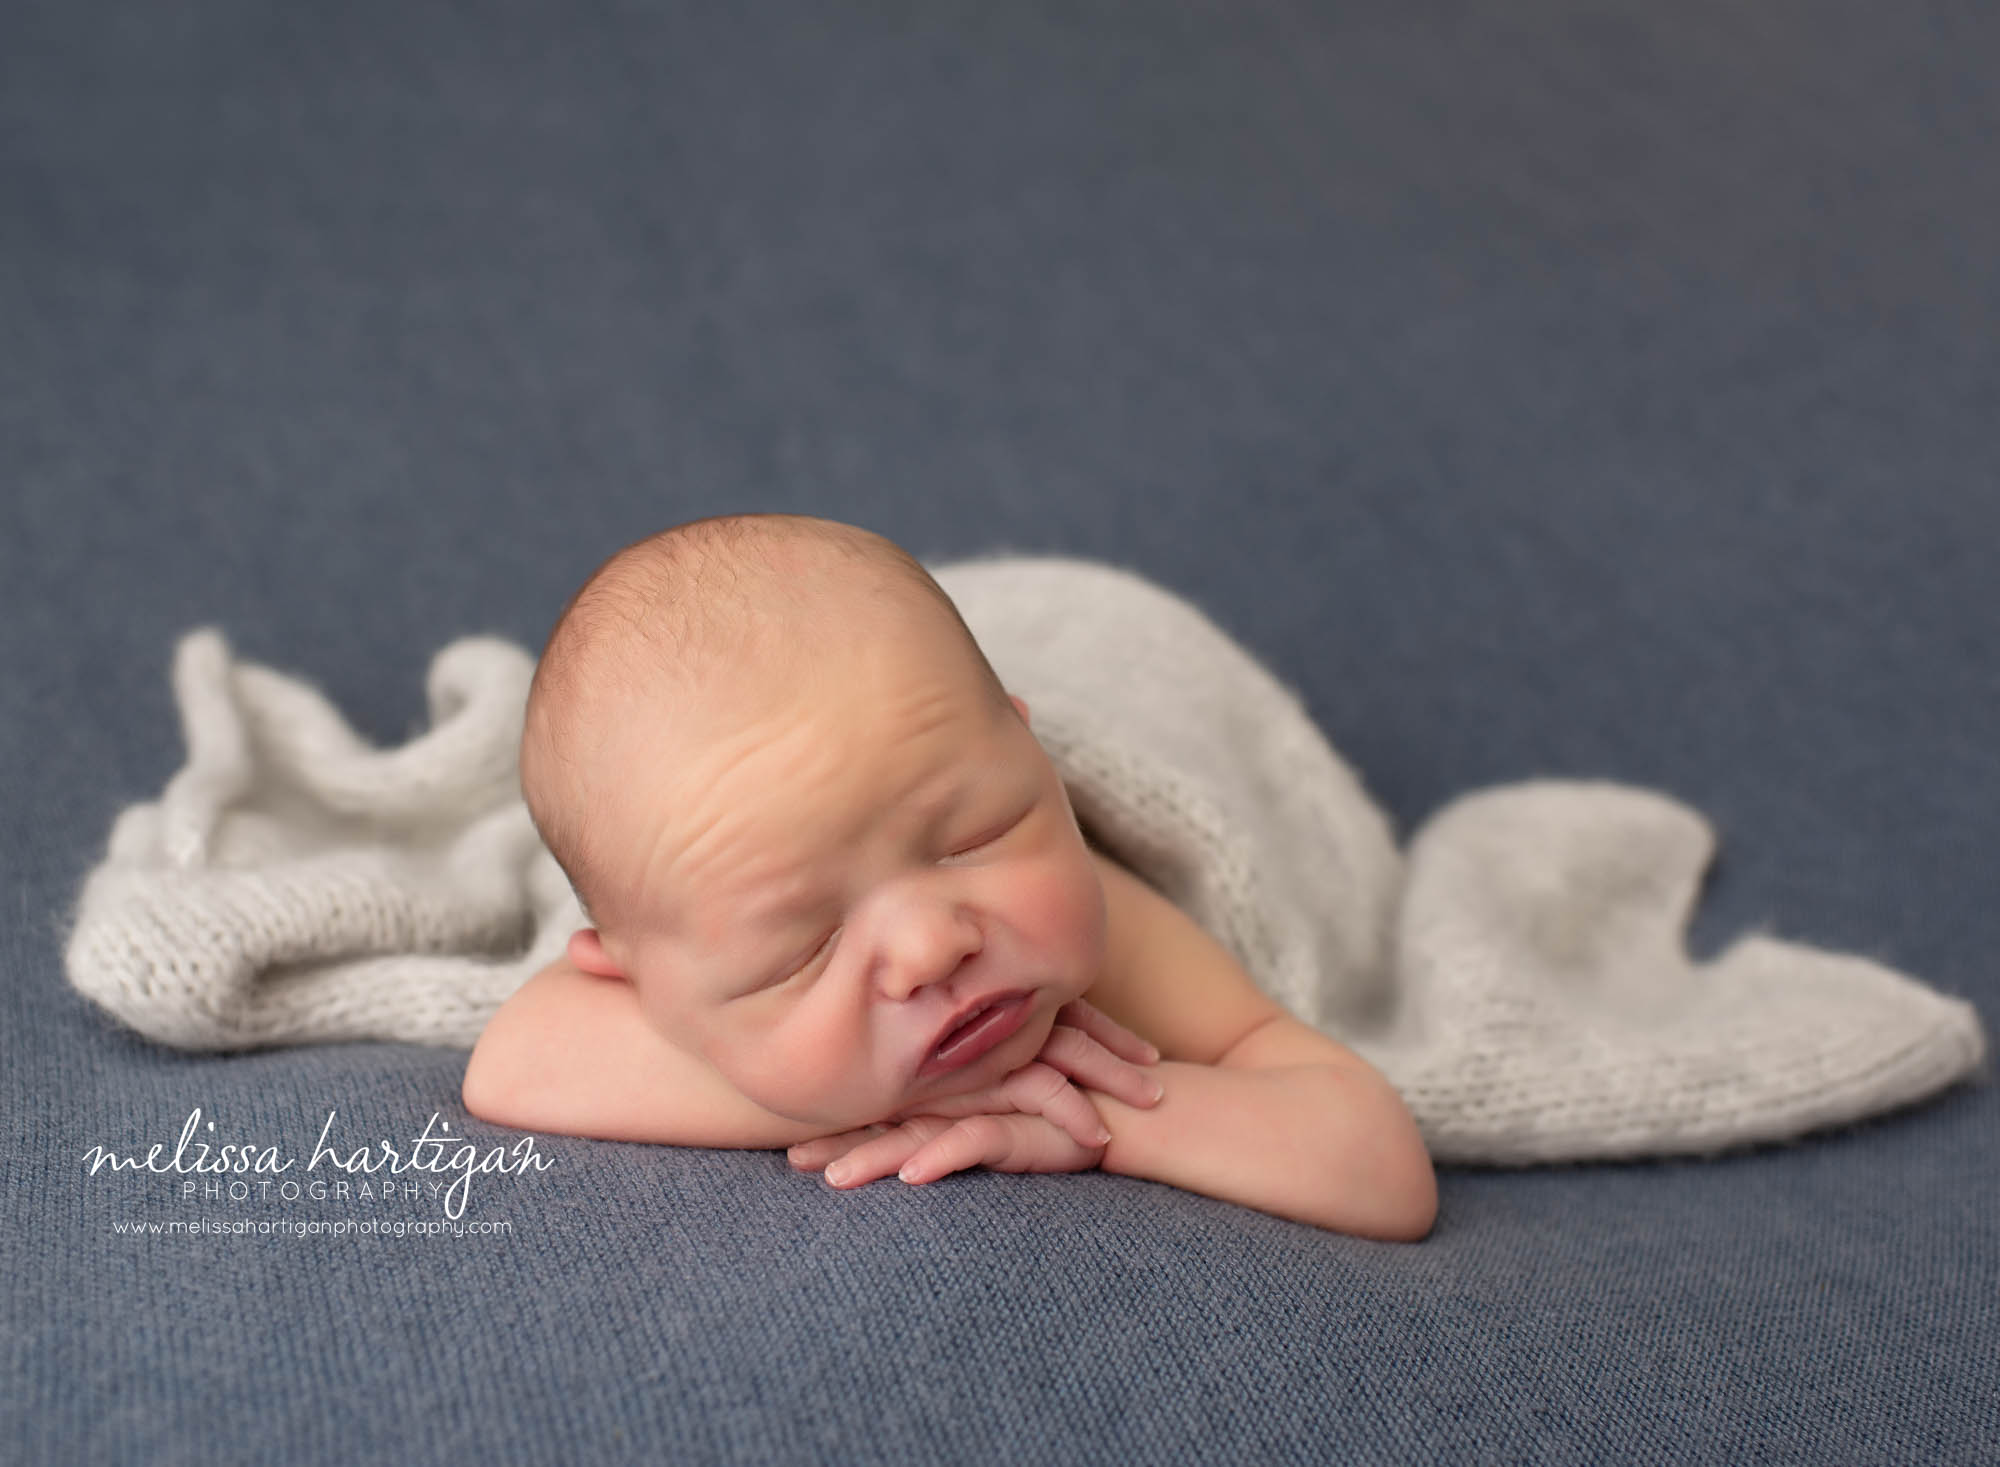 Newborn baby boy posed with chin on hands facing forward on blue gray backdrop with light gray knitted wrap drapped over